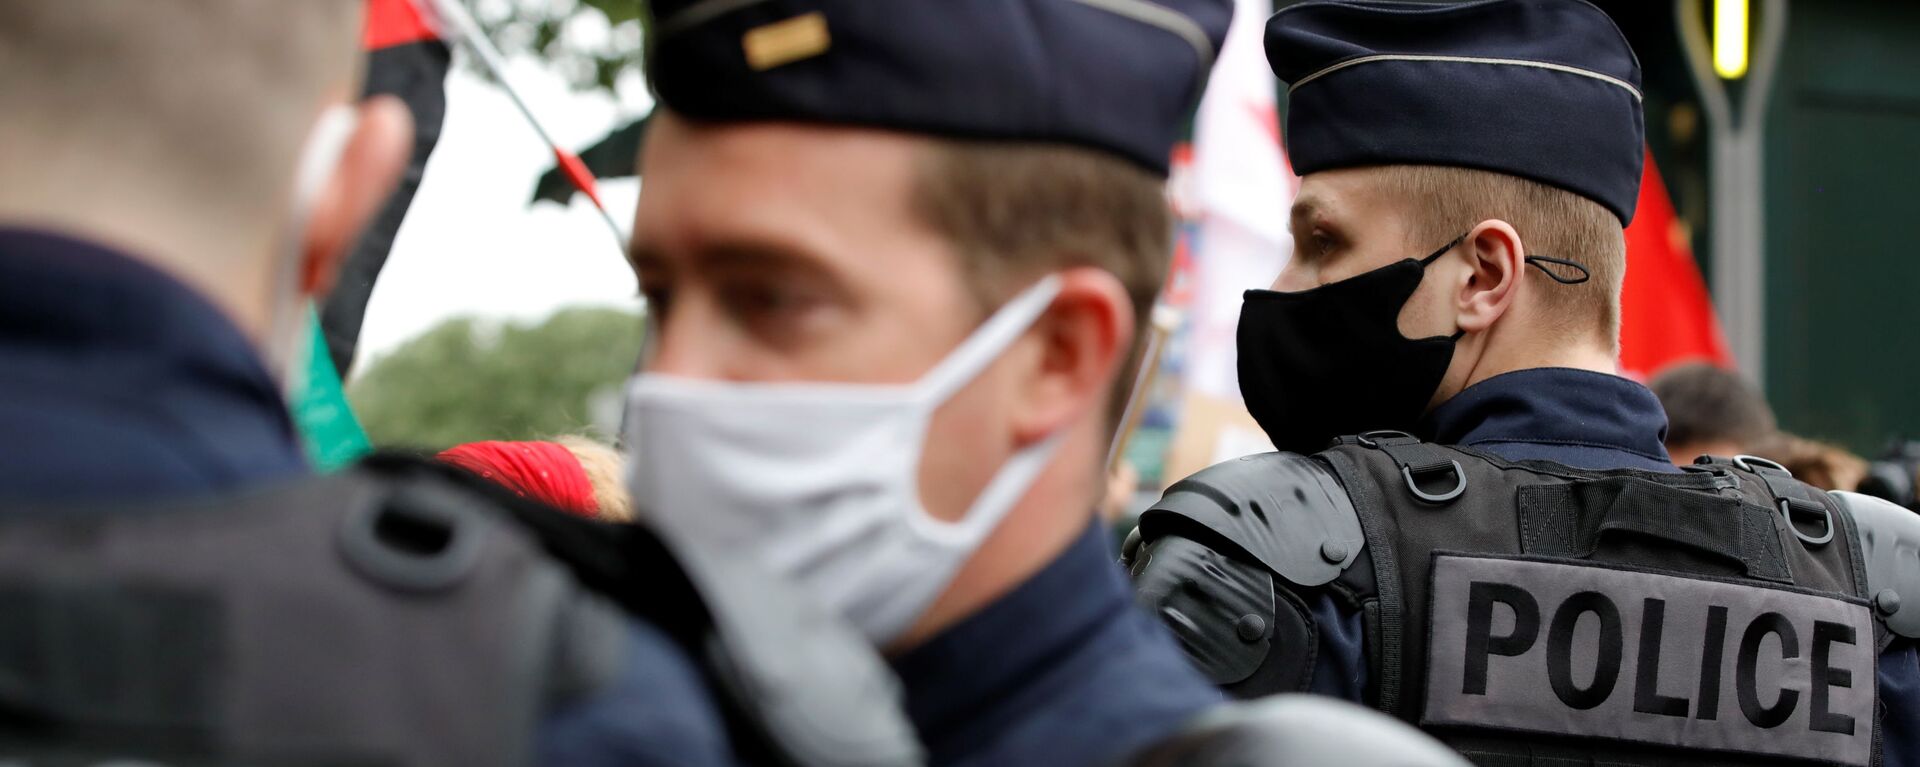 French police stand guard during a protest, following a flare-up of Israeli-Palestinian violence, in Paris, France, May 12, 2021 - Sputnik International, 1920, 09.08.2021